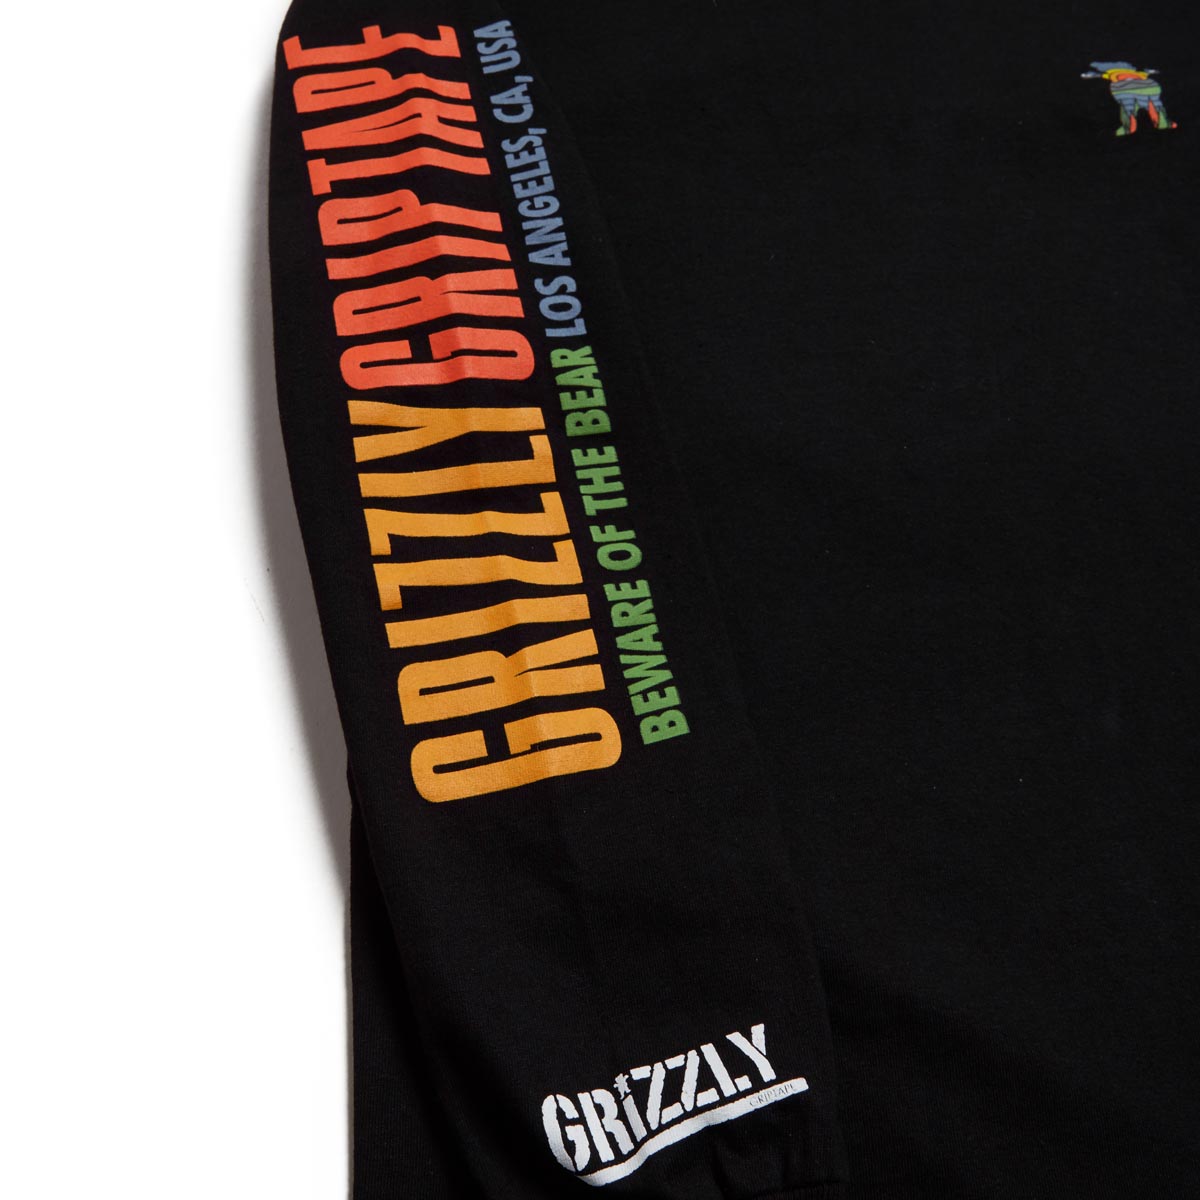 Grizzly Sun Valley Long Sleeve T-Shirt - Black image 3